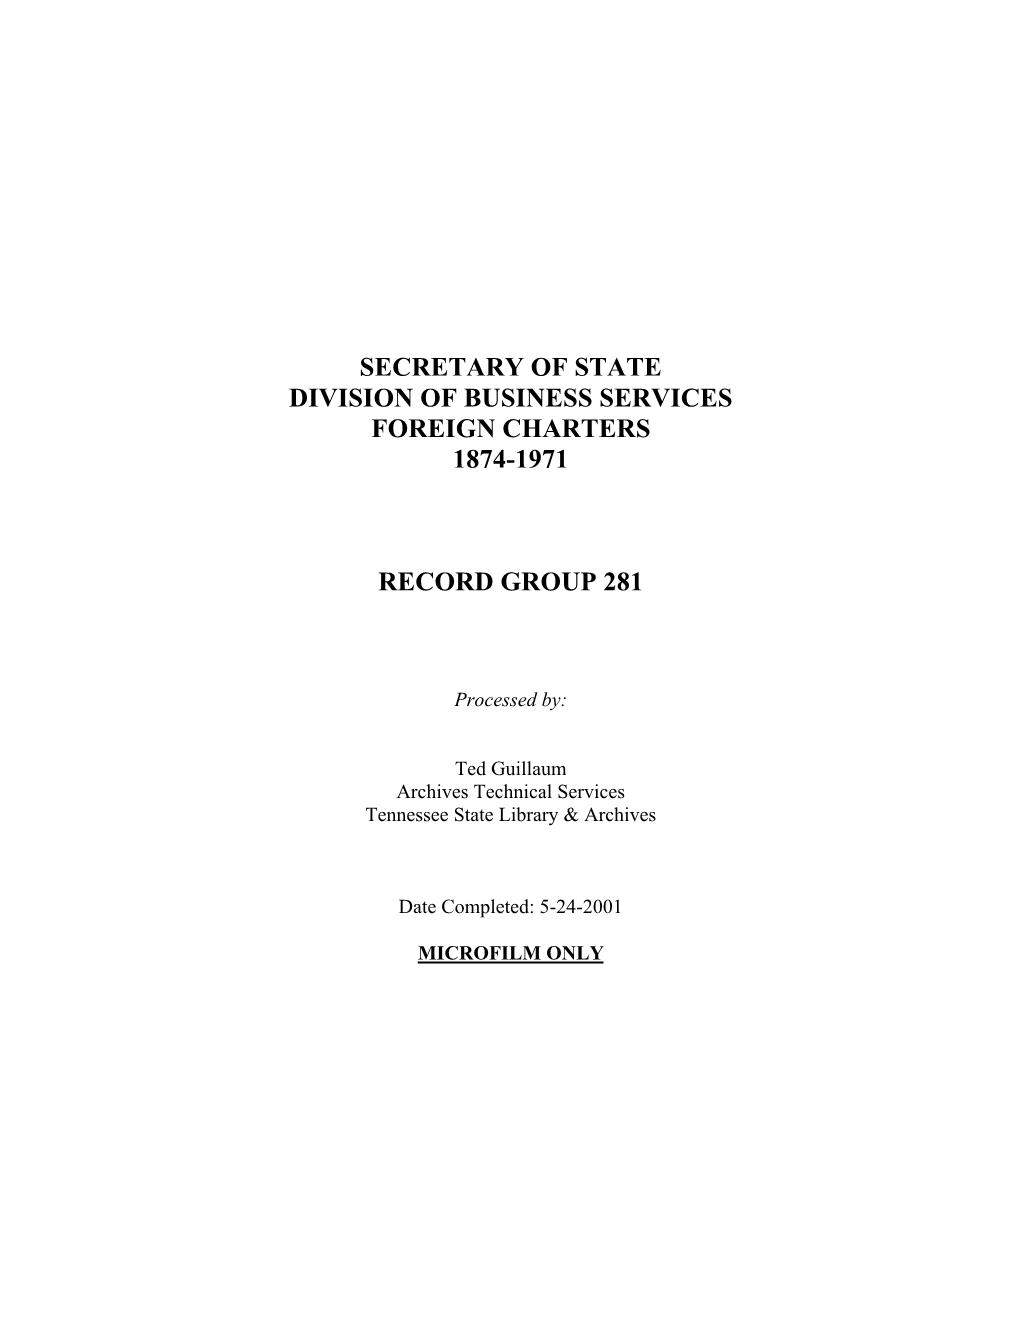 Secretary of State Division of Business Services Foreign Charters 1874-1971 Record Group